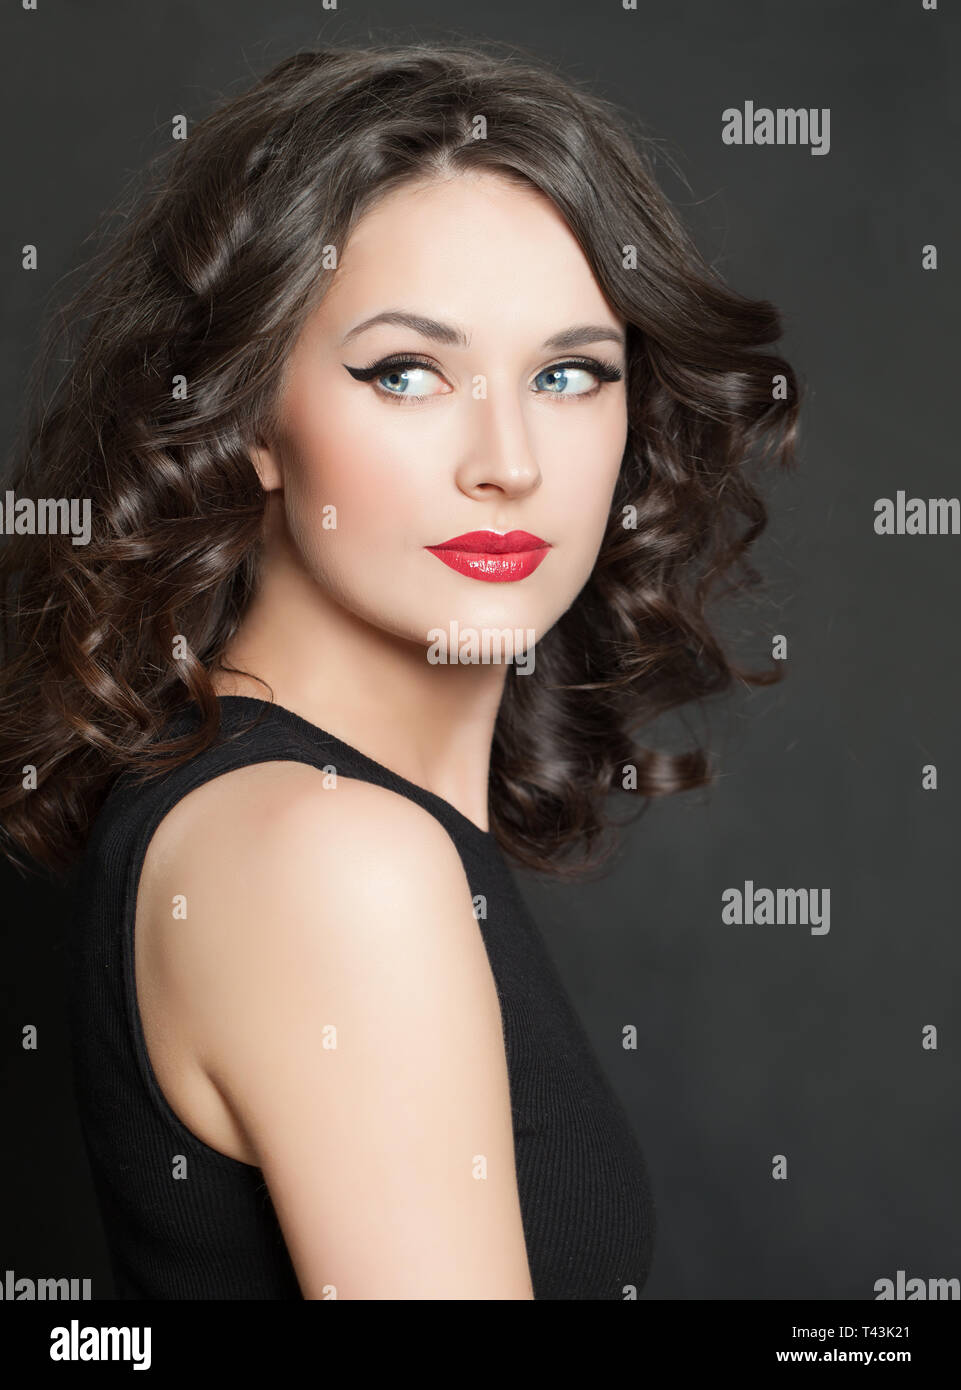 Attractive woman portrait. Perfect model with makeup and curly hair Stock Photo